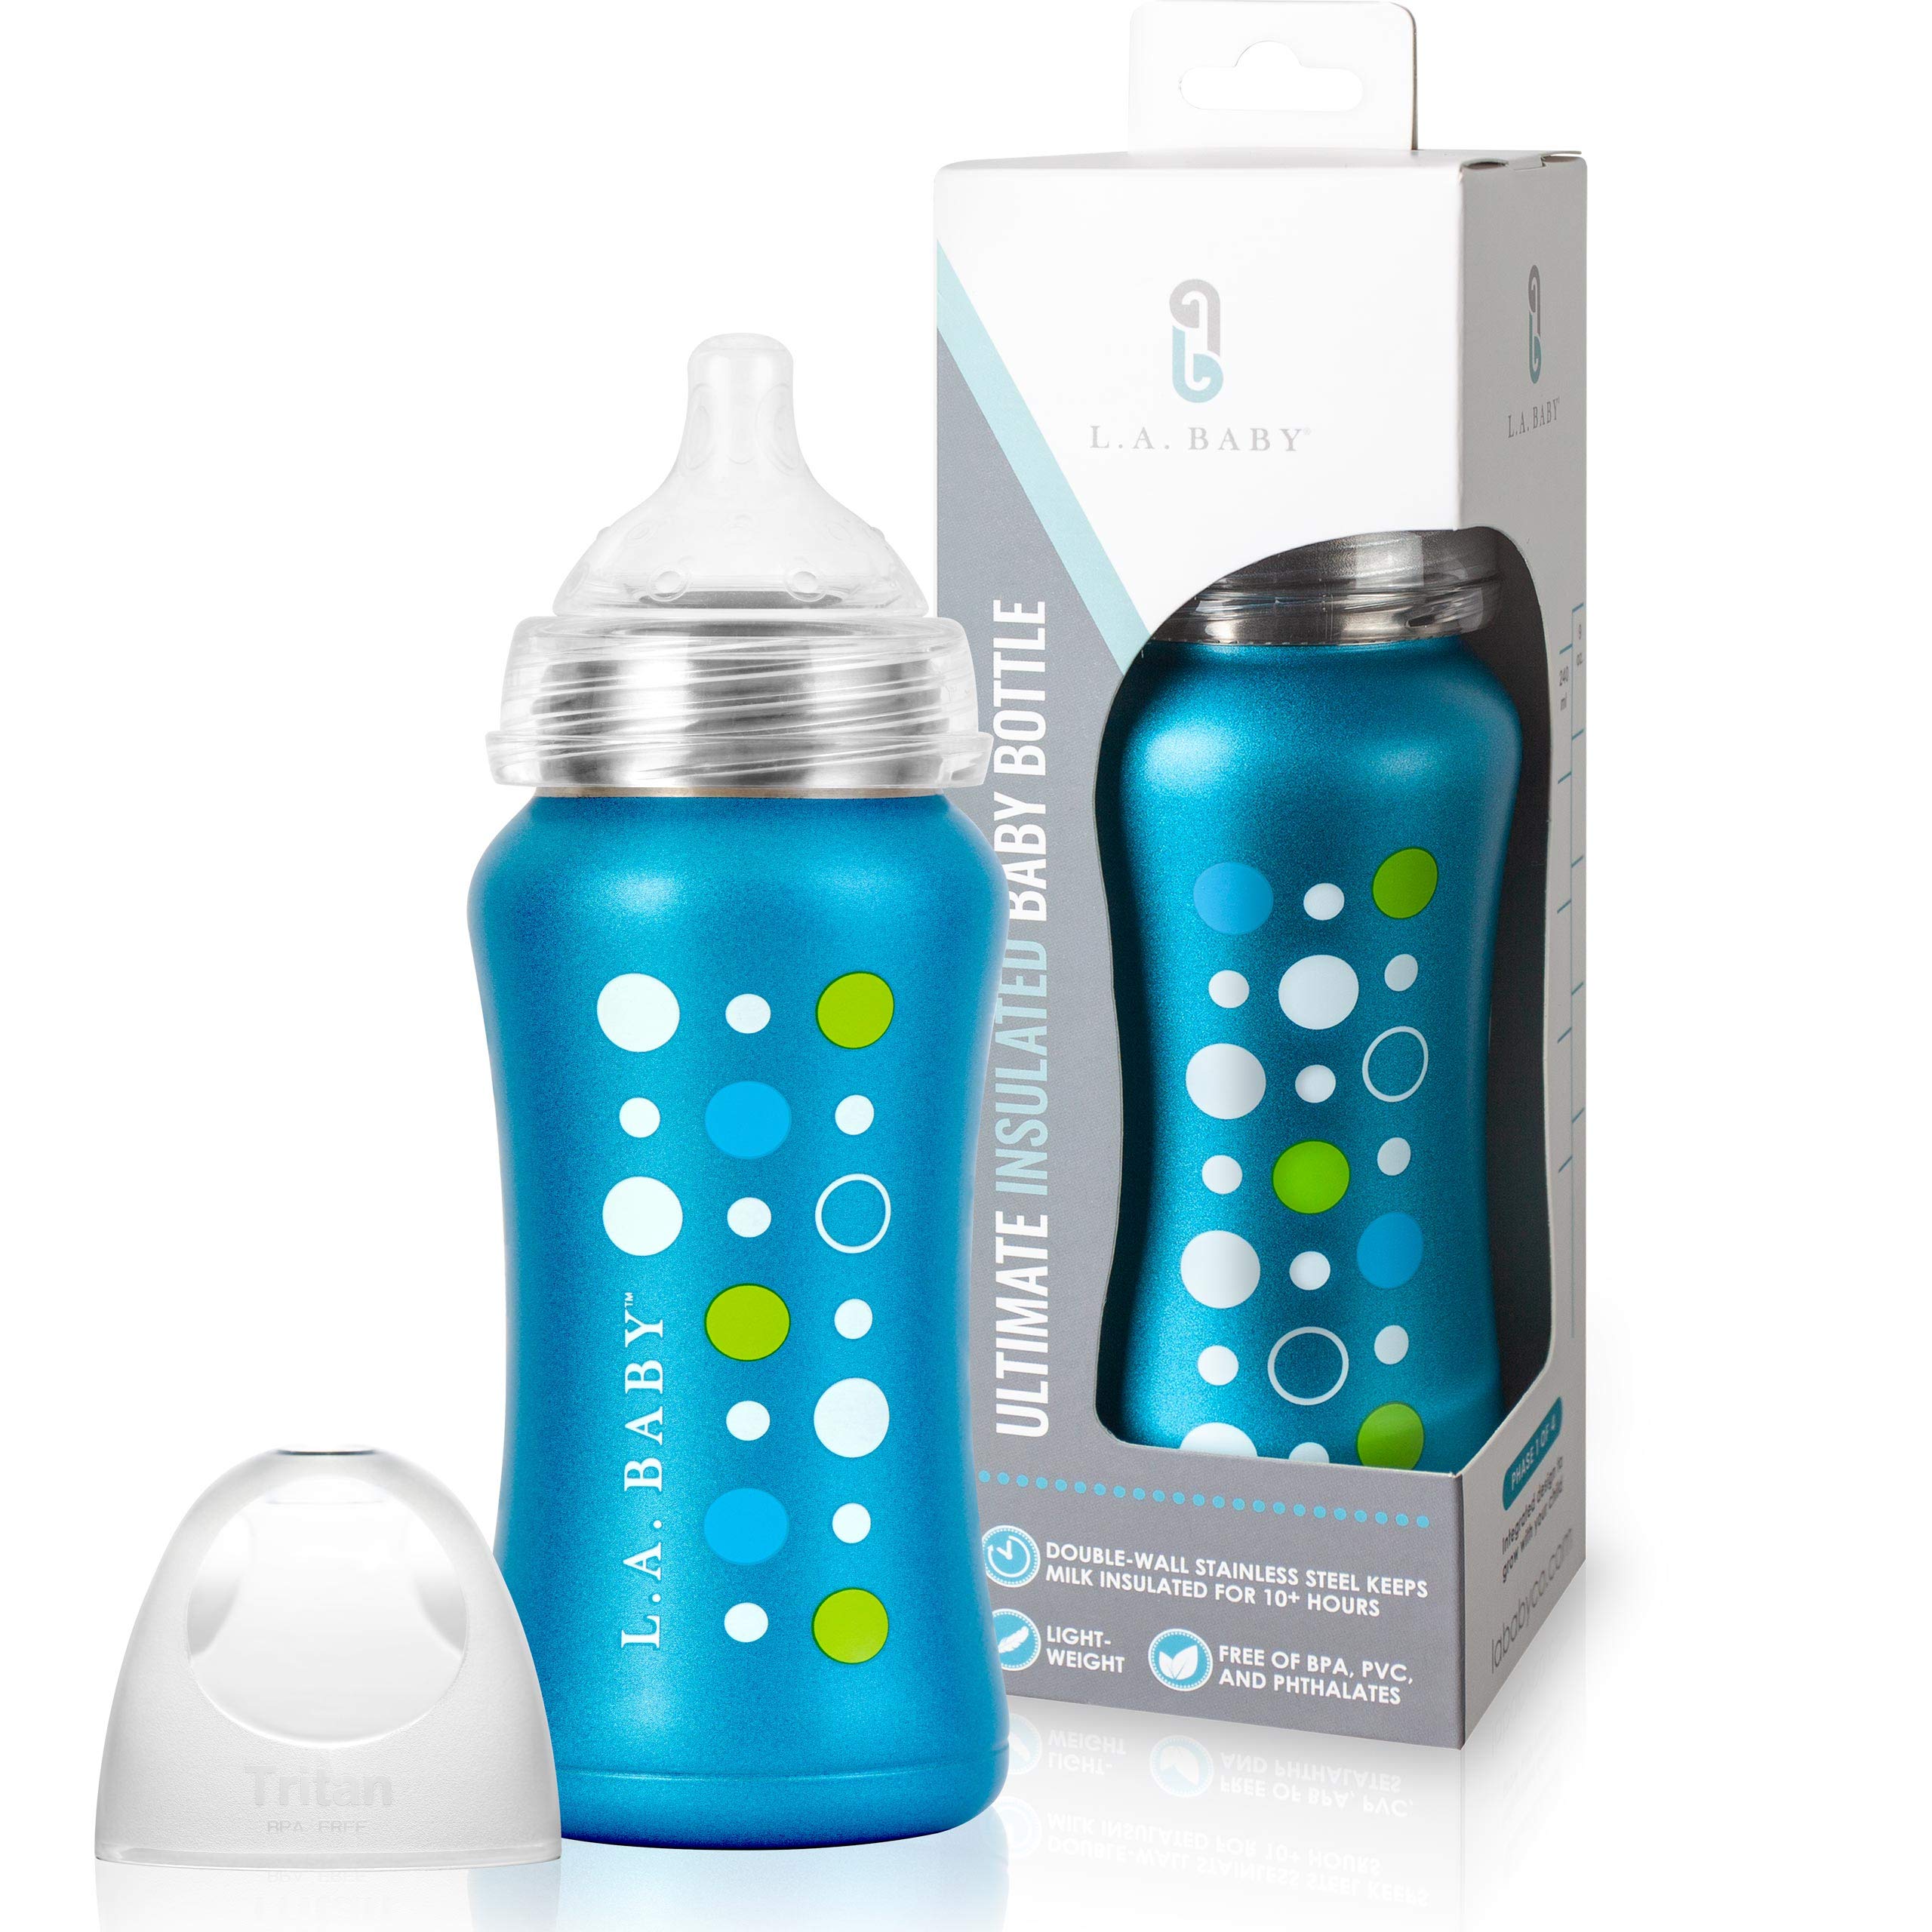 Pacific Baby Hot-Tot Stainless Steel Insulated Baby Bottle - Blueberr. –  Pacific Baby Inc.